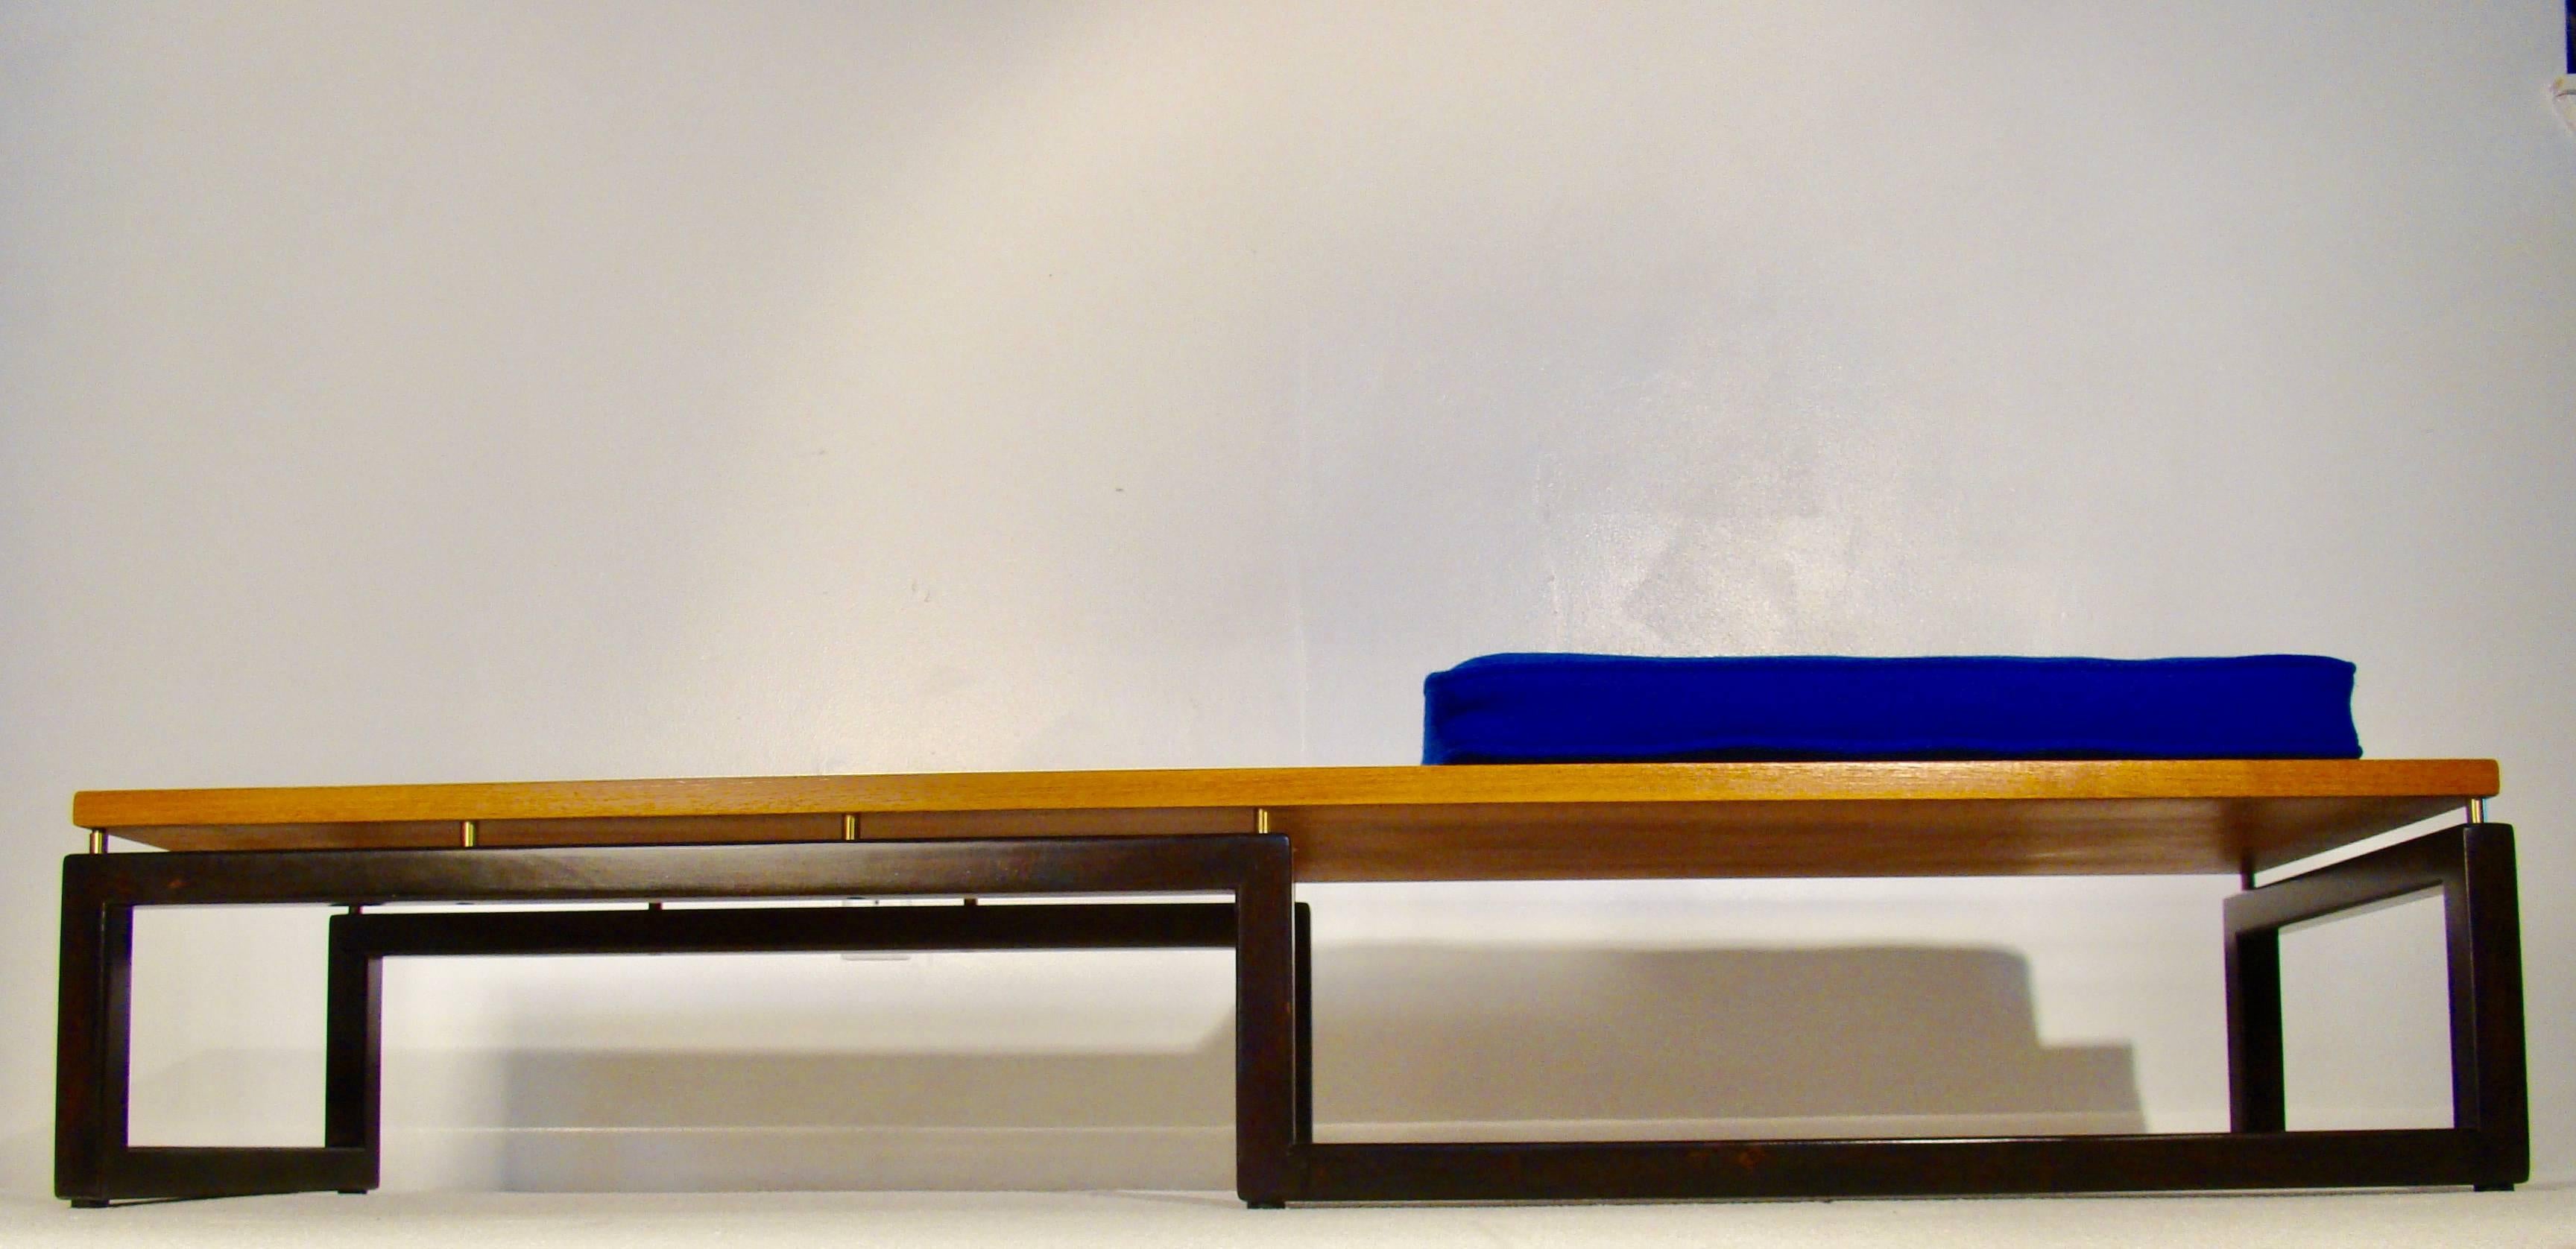 Sleek low geometric bench or coffee table by Michael Taylor for Baker Furniture. The top rests on raised brass dowels and can be used as a bench or coffee table. Retains the original brass baker tag on the underside. Has been completely restored.